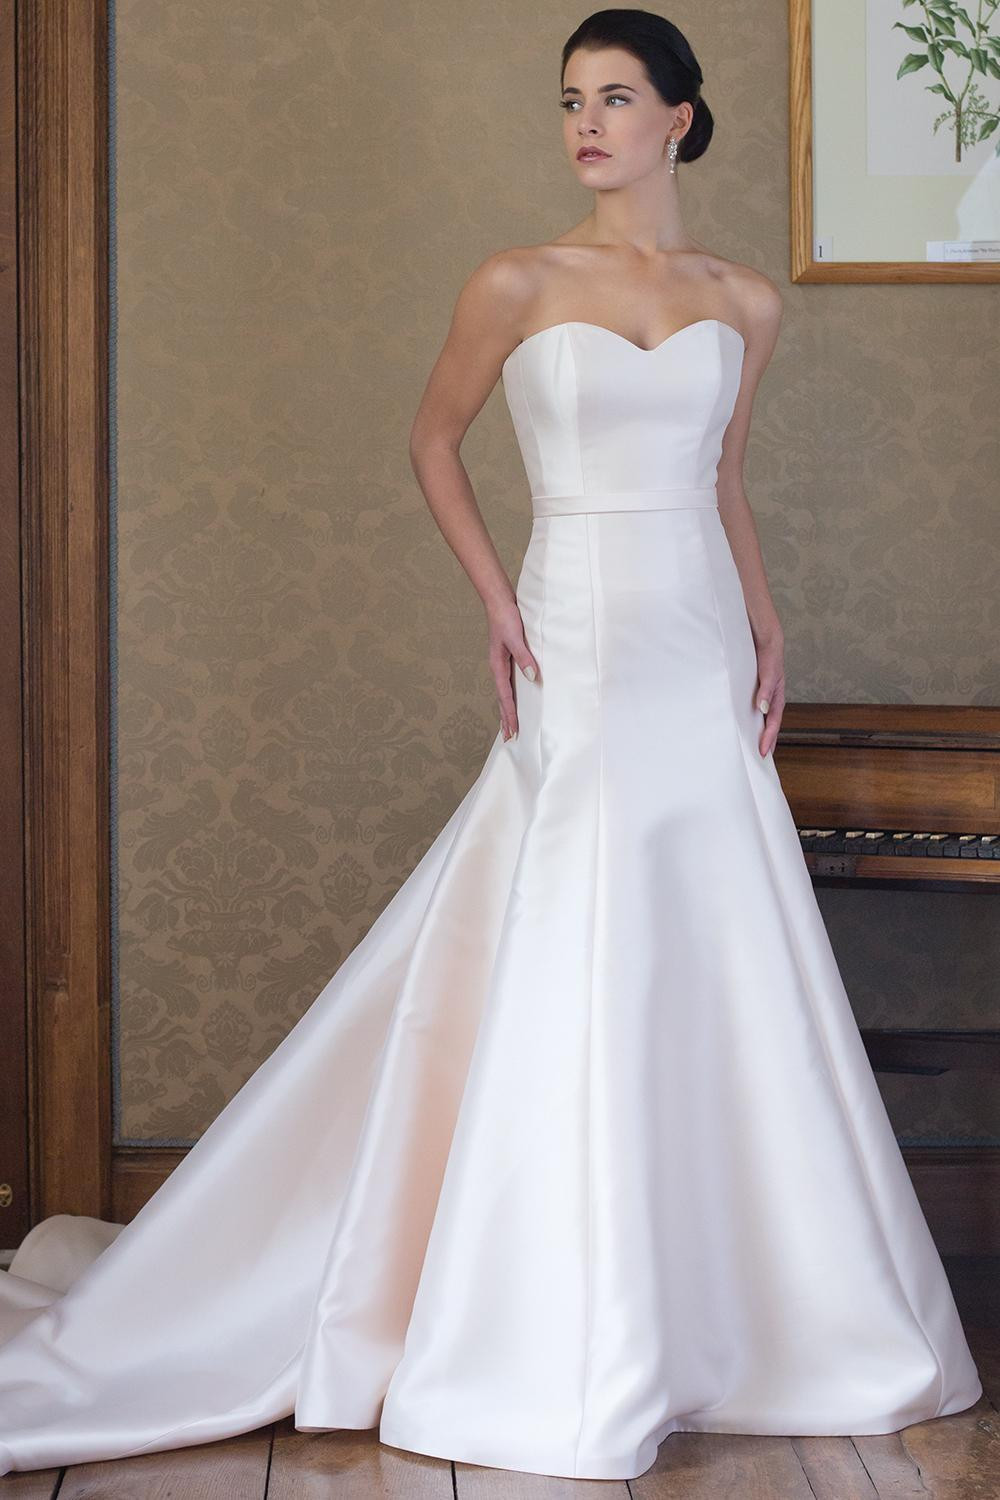 Satin Wedding Dresses
 Simple Satin Sweetheart Neck Fit And Flare Wedding Dress